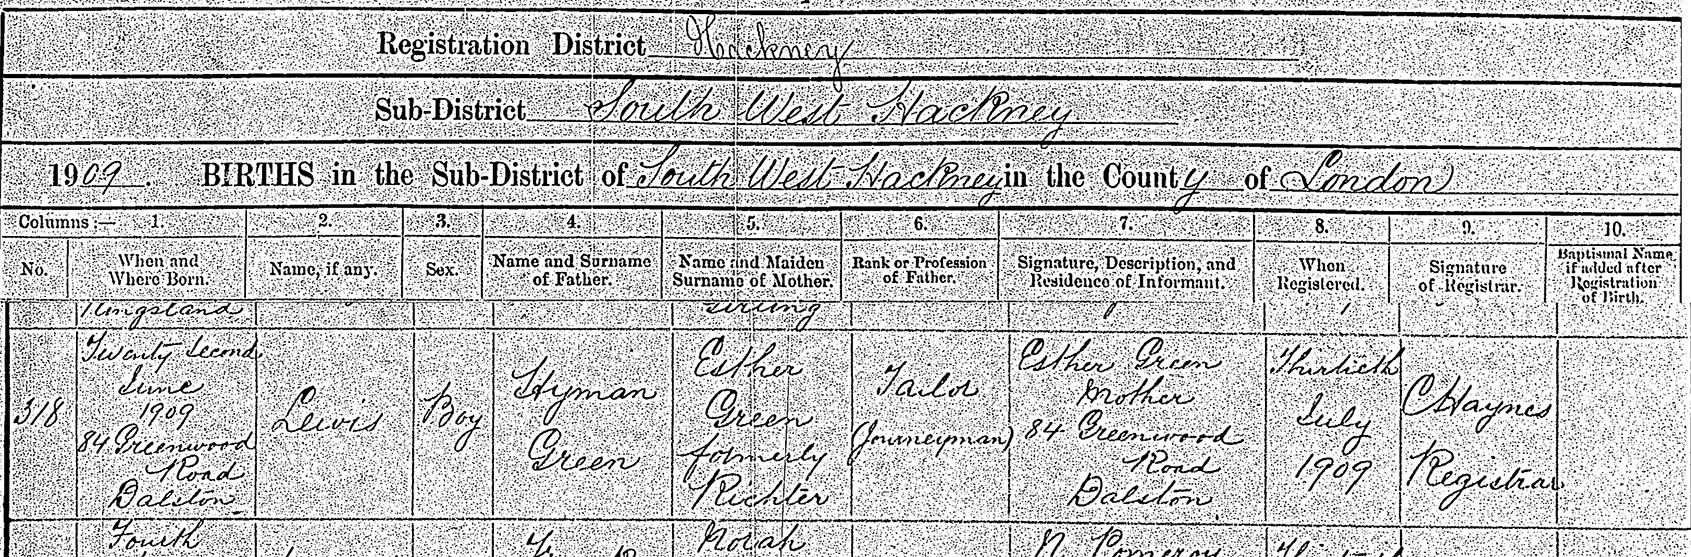 Lewis Green (1909-1981) - Birth Certificate (South West Hackney, London, 1909)